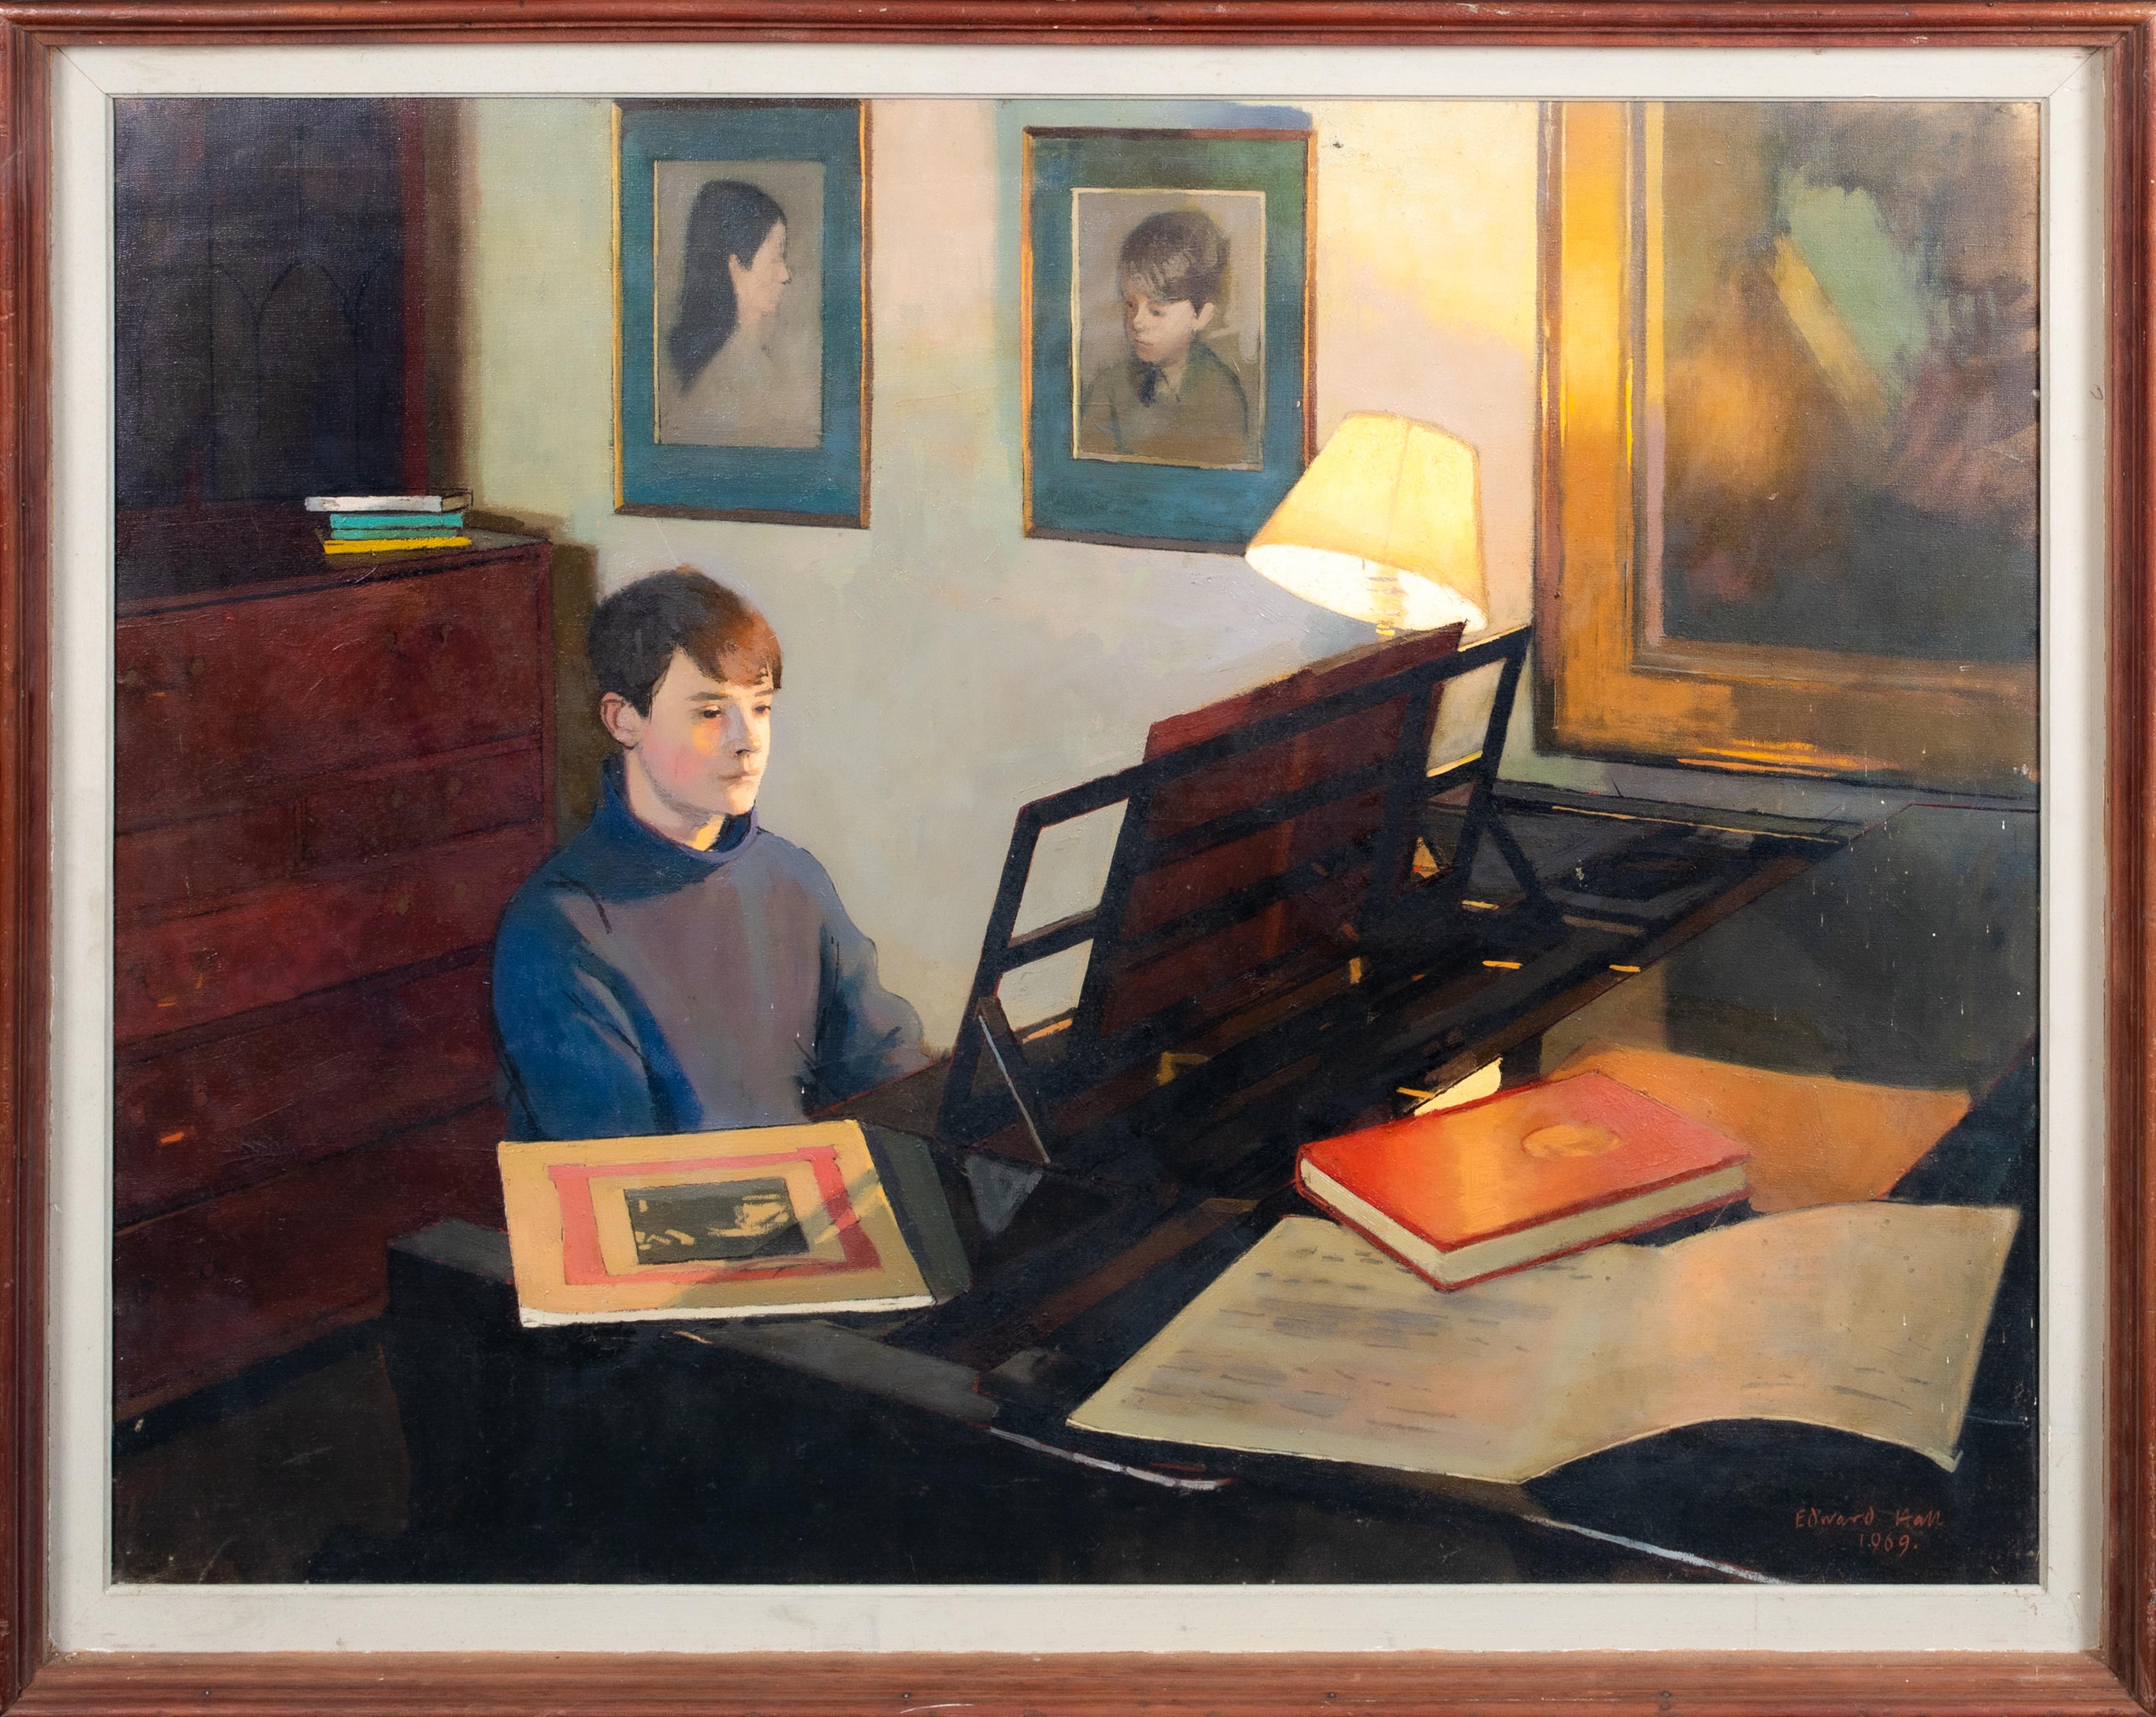 Unknown Portrait Painting - Matthew At The Piano, dated 1969  by EDWARD HALL (1922-1991)